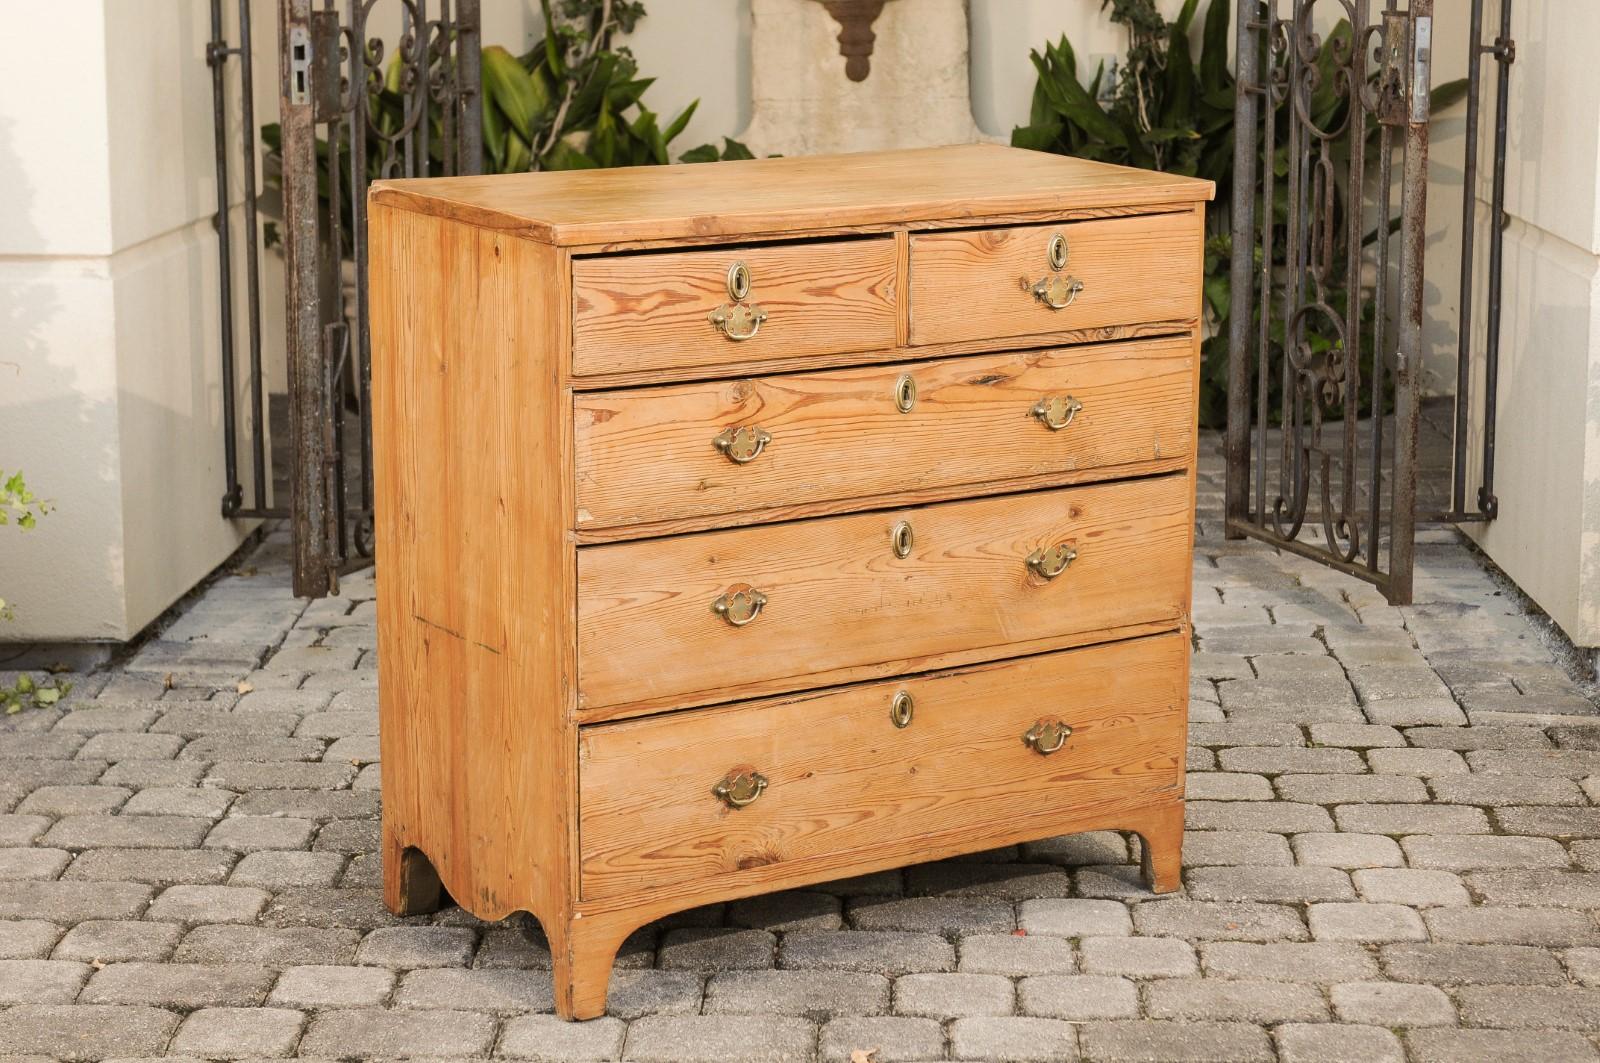 English Georgian Period 1820s Pine Five-Drawer Chest with Arched Skirt (19. Jahrhundert)